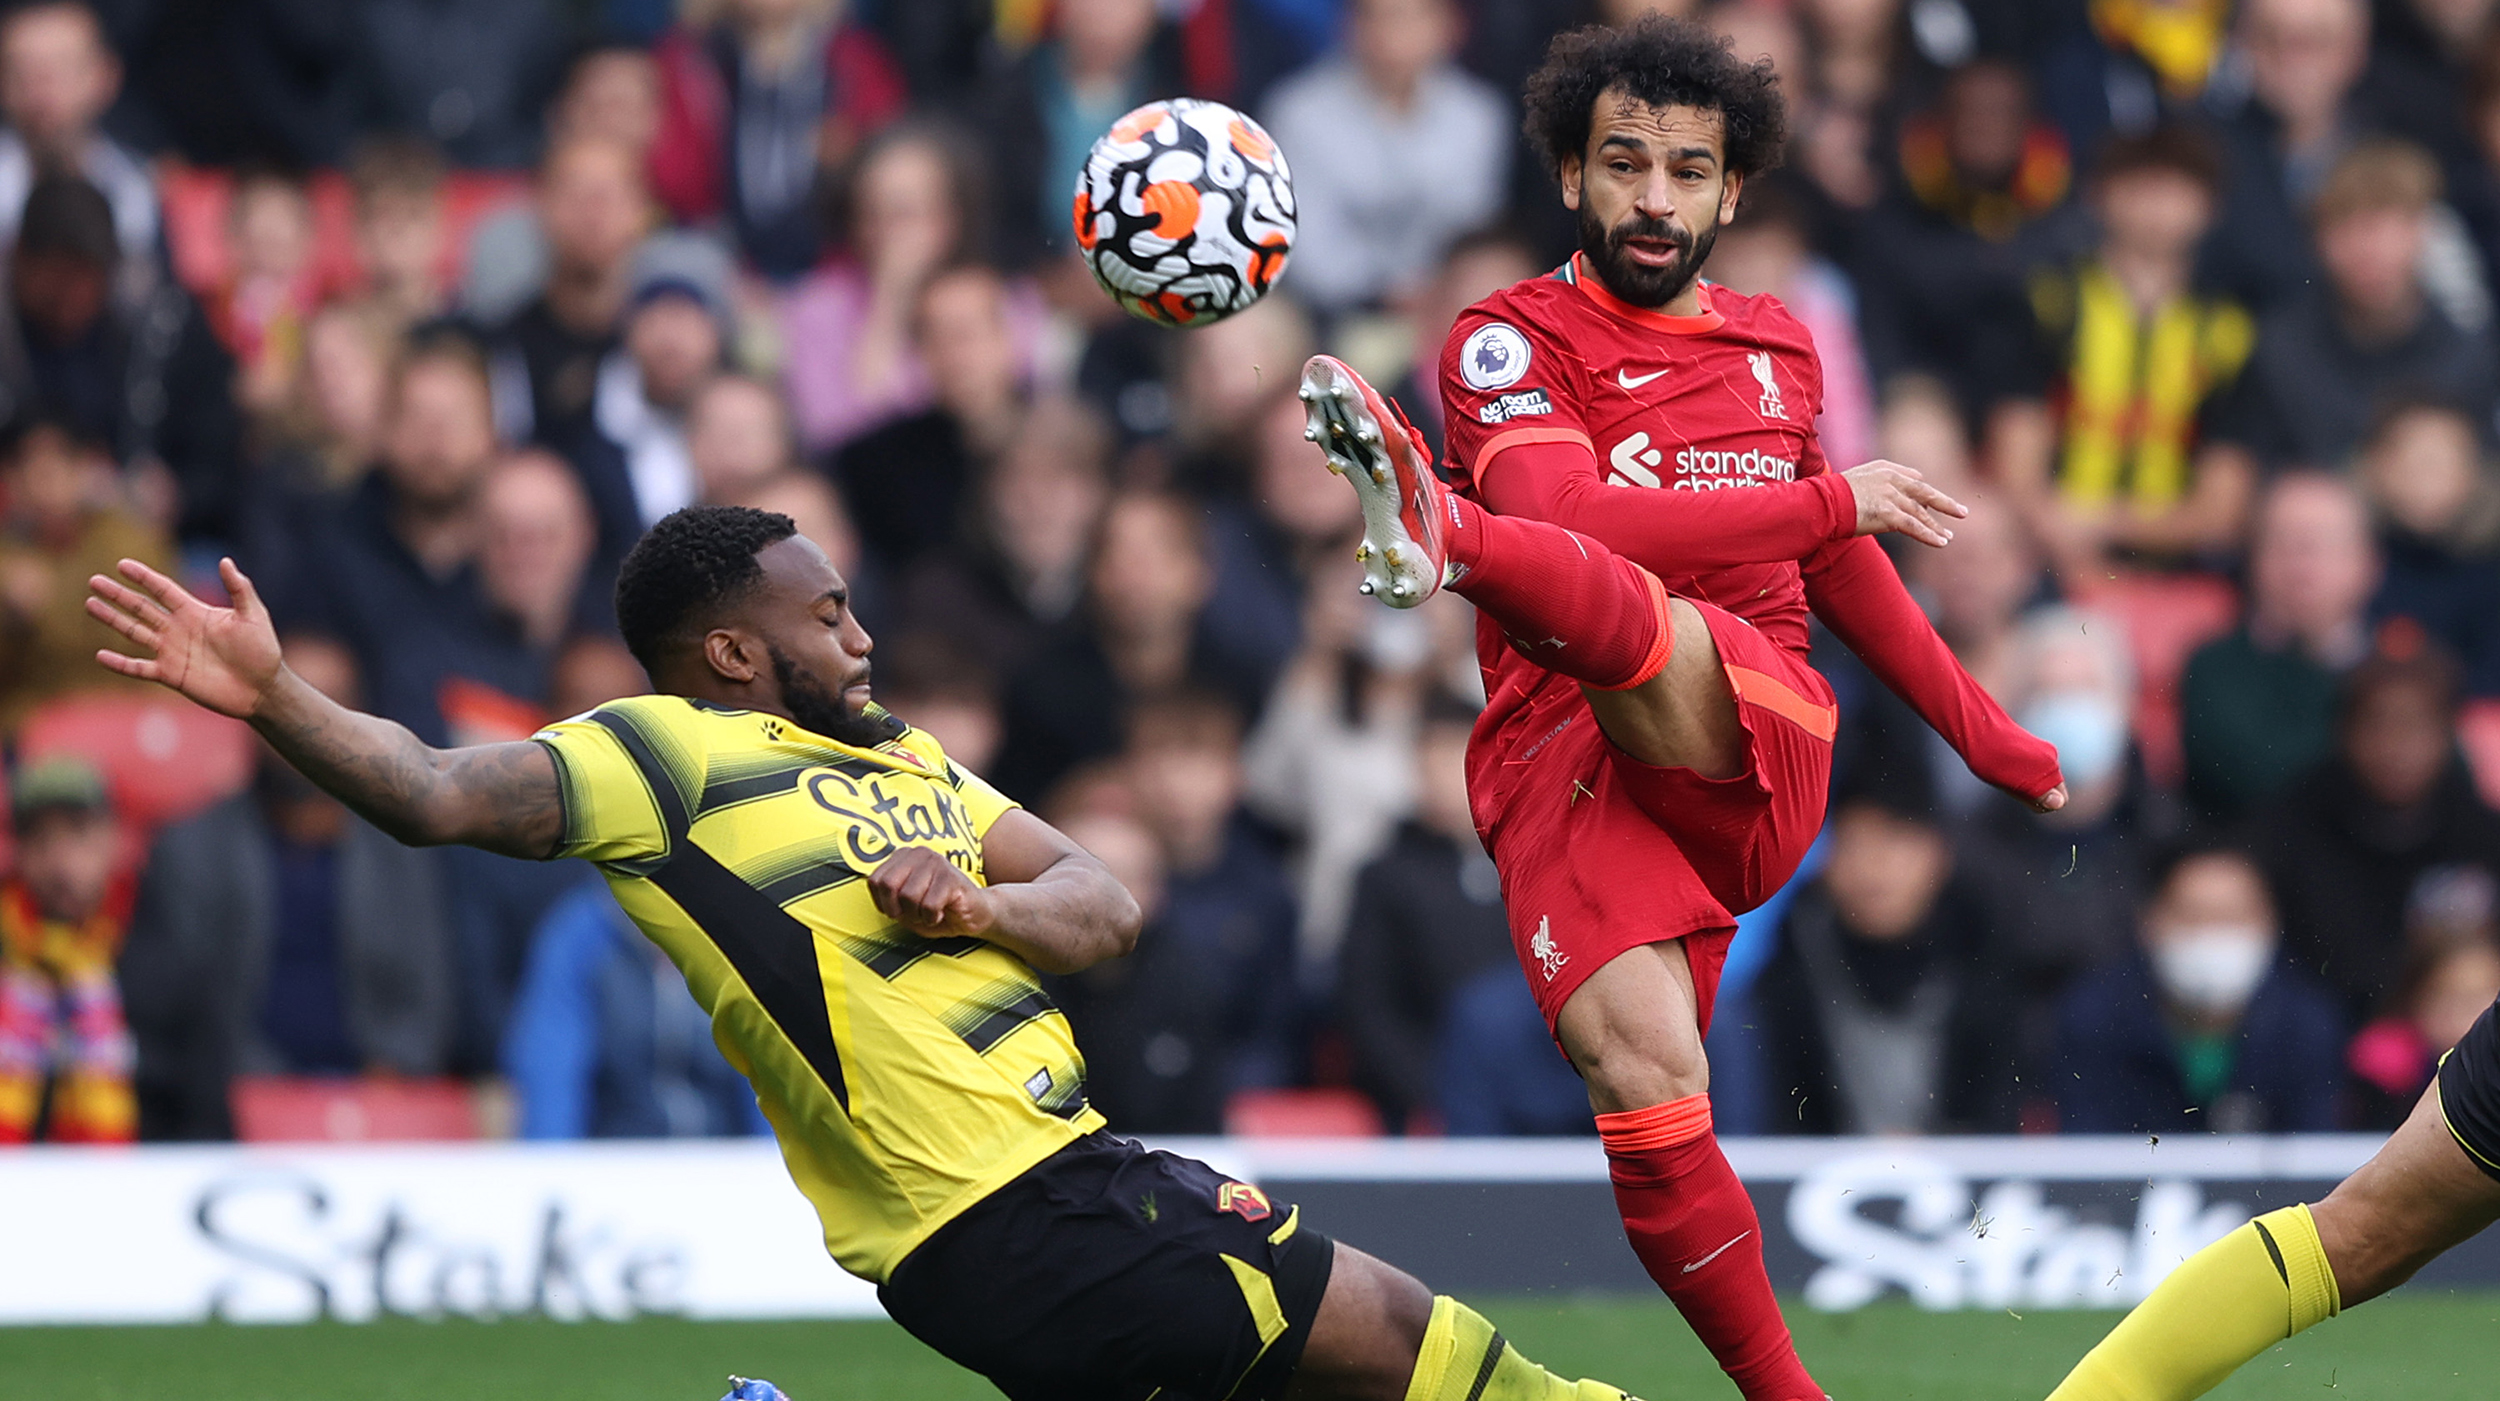 Mohamed Salah of Liverpool takes a shot as Danny Rose of Watford FC attempts to block during the Premier League match between Watford and Liverpool at Vicarage Road on October 16, 2021 in Watford, England.